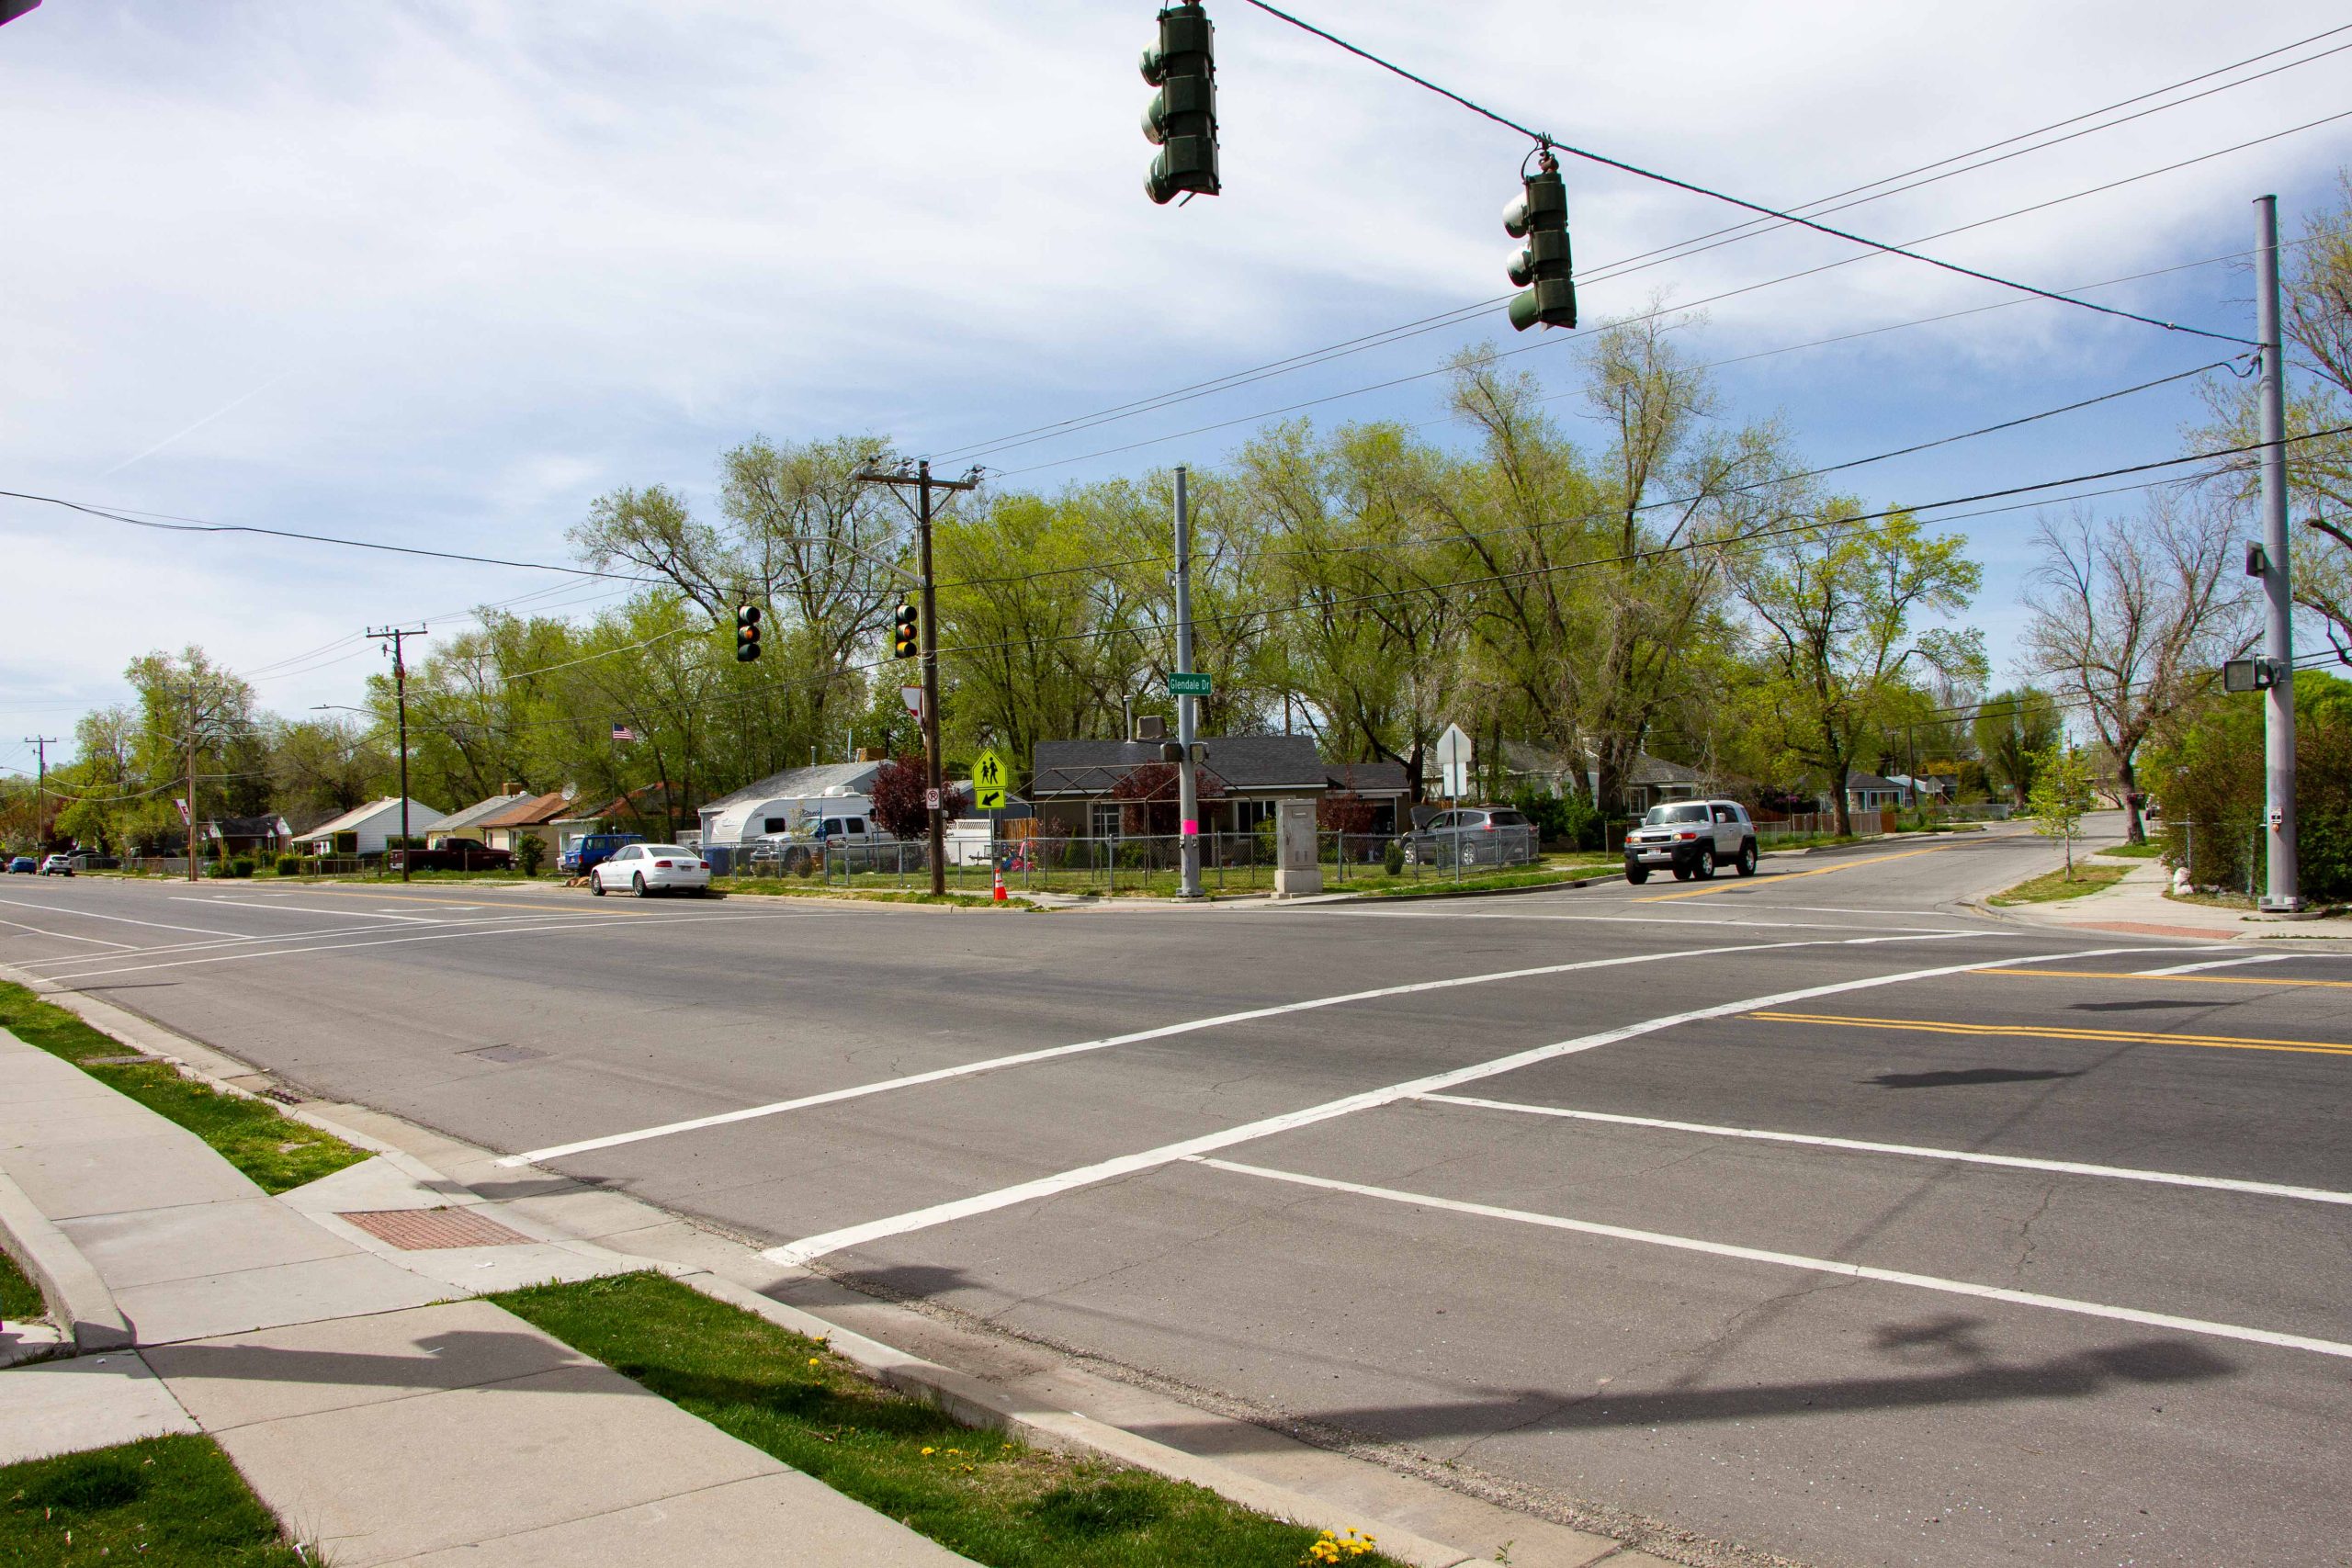 A picture of an intersection along California Avenue.